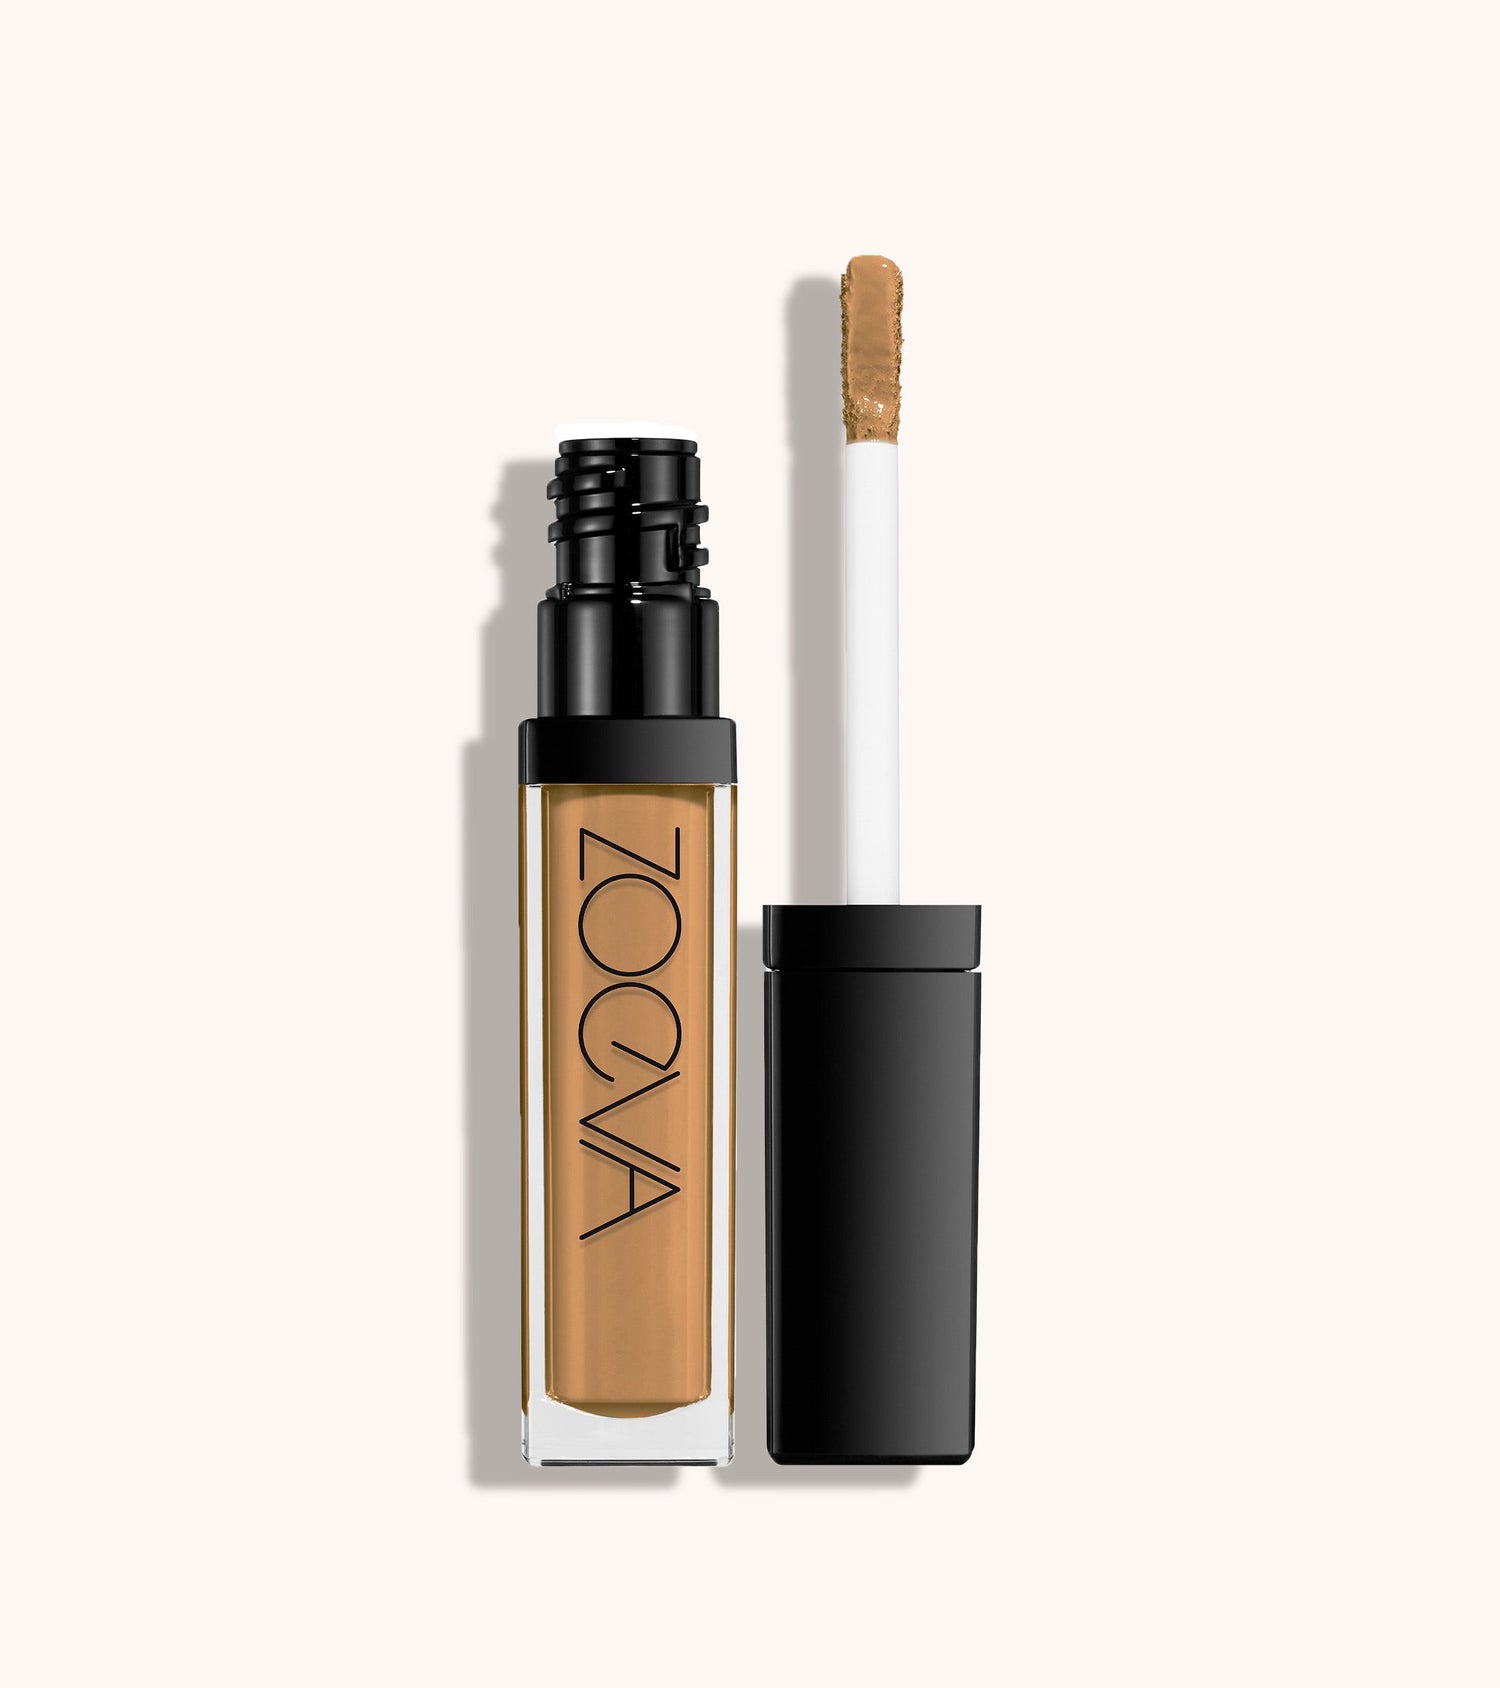 Authentik Skin Perfector Concealer (200 Present) Main Image featured